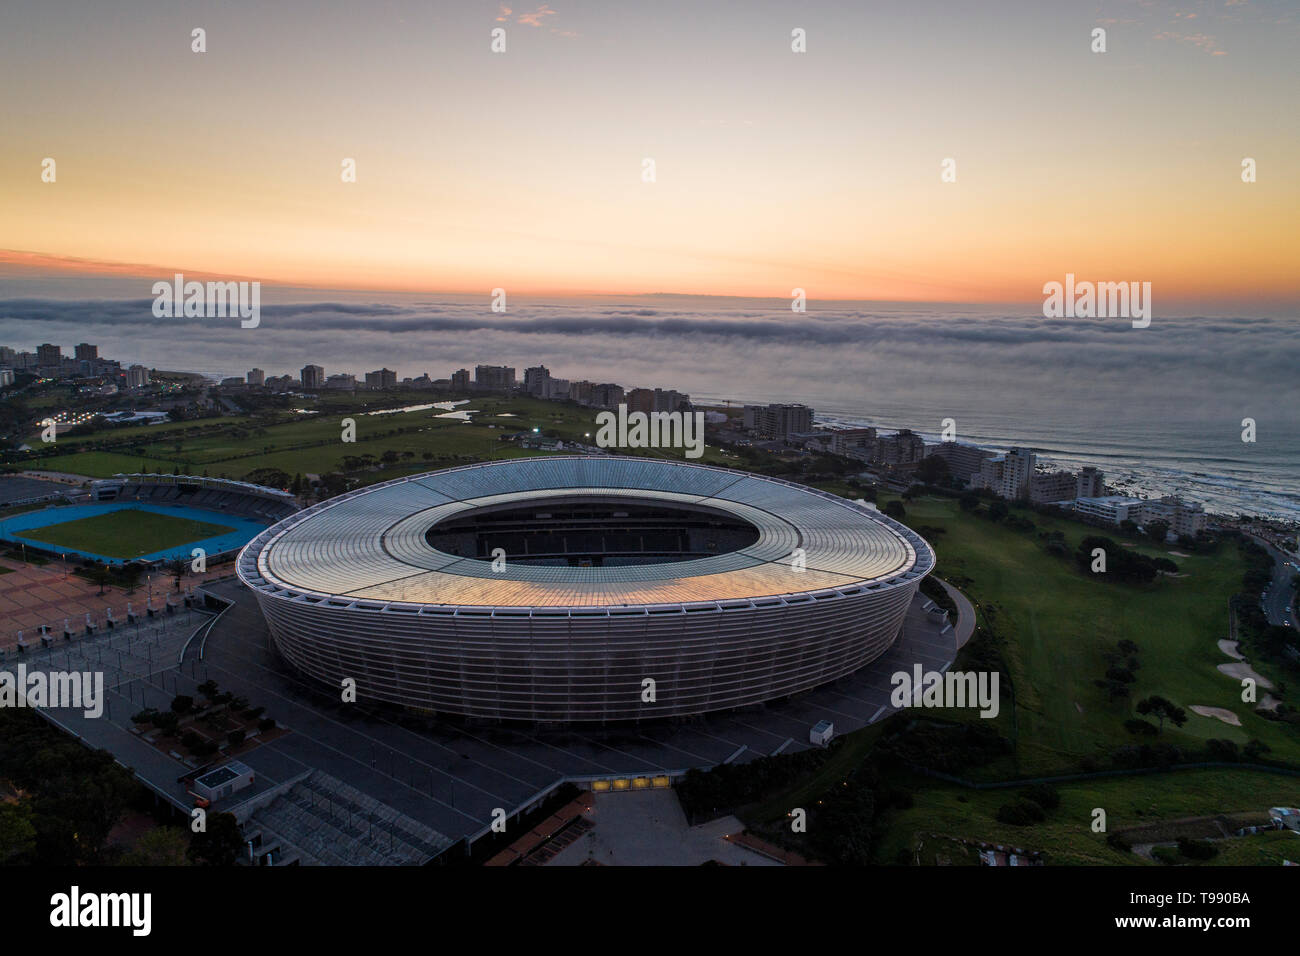 Stadium, Cape Town, South Africa Stock Photo